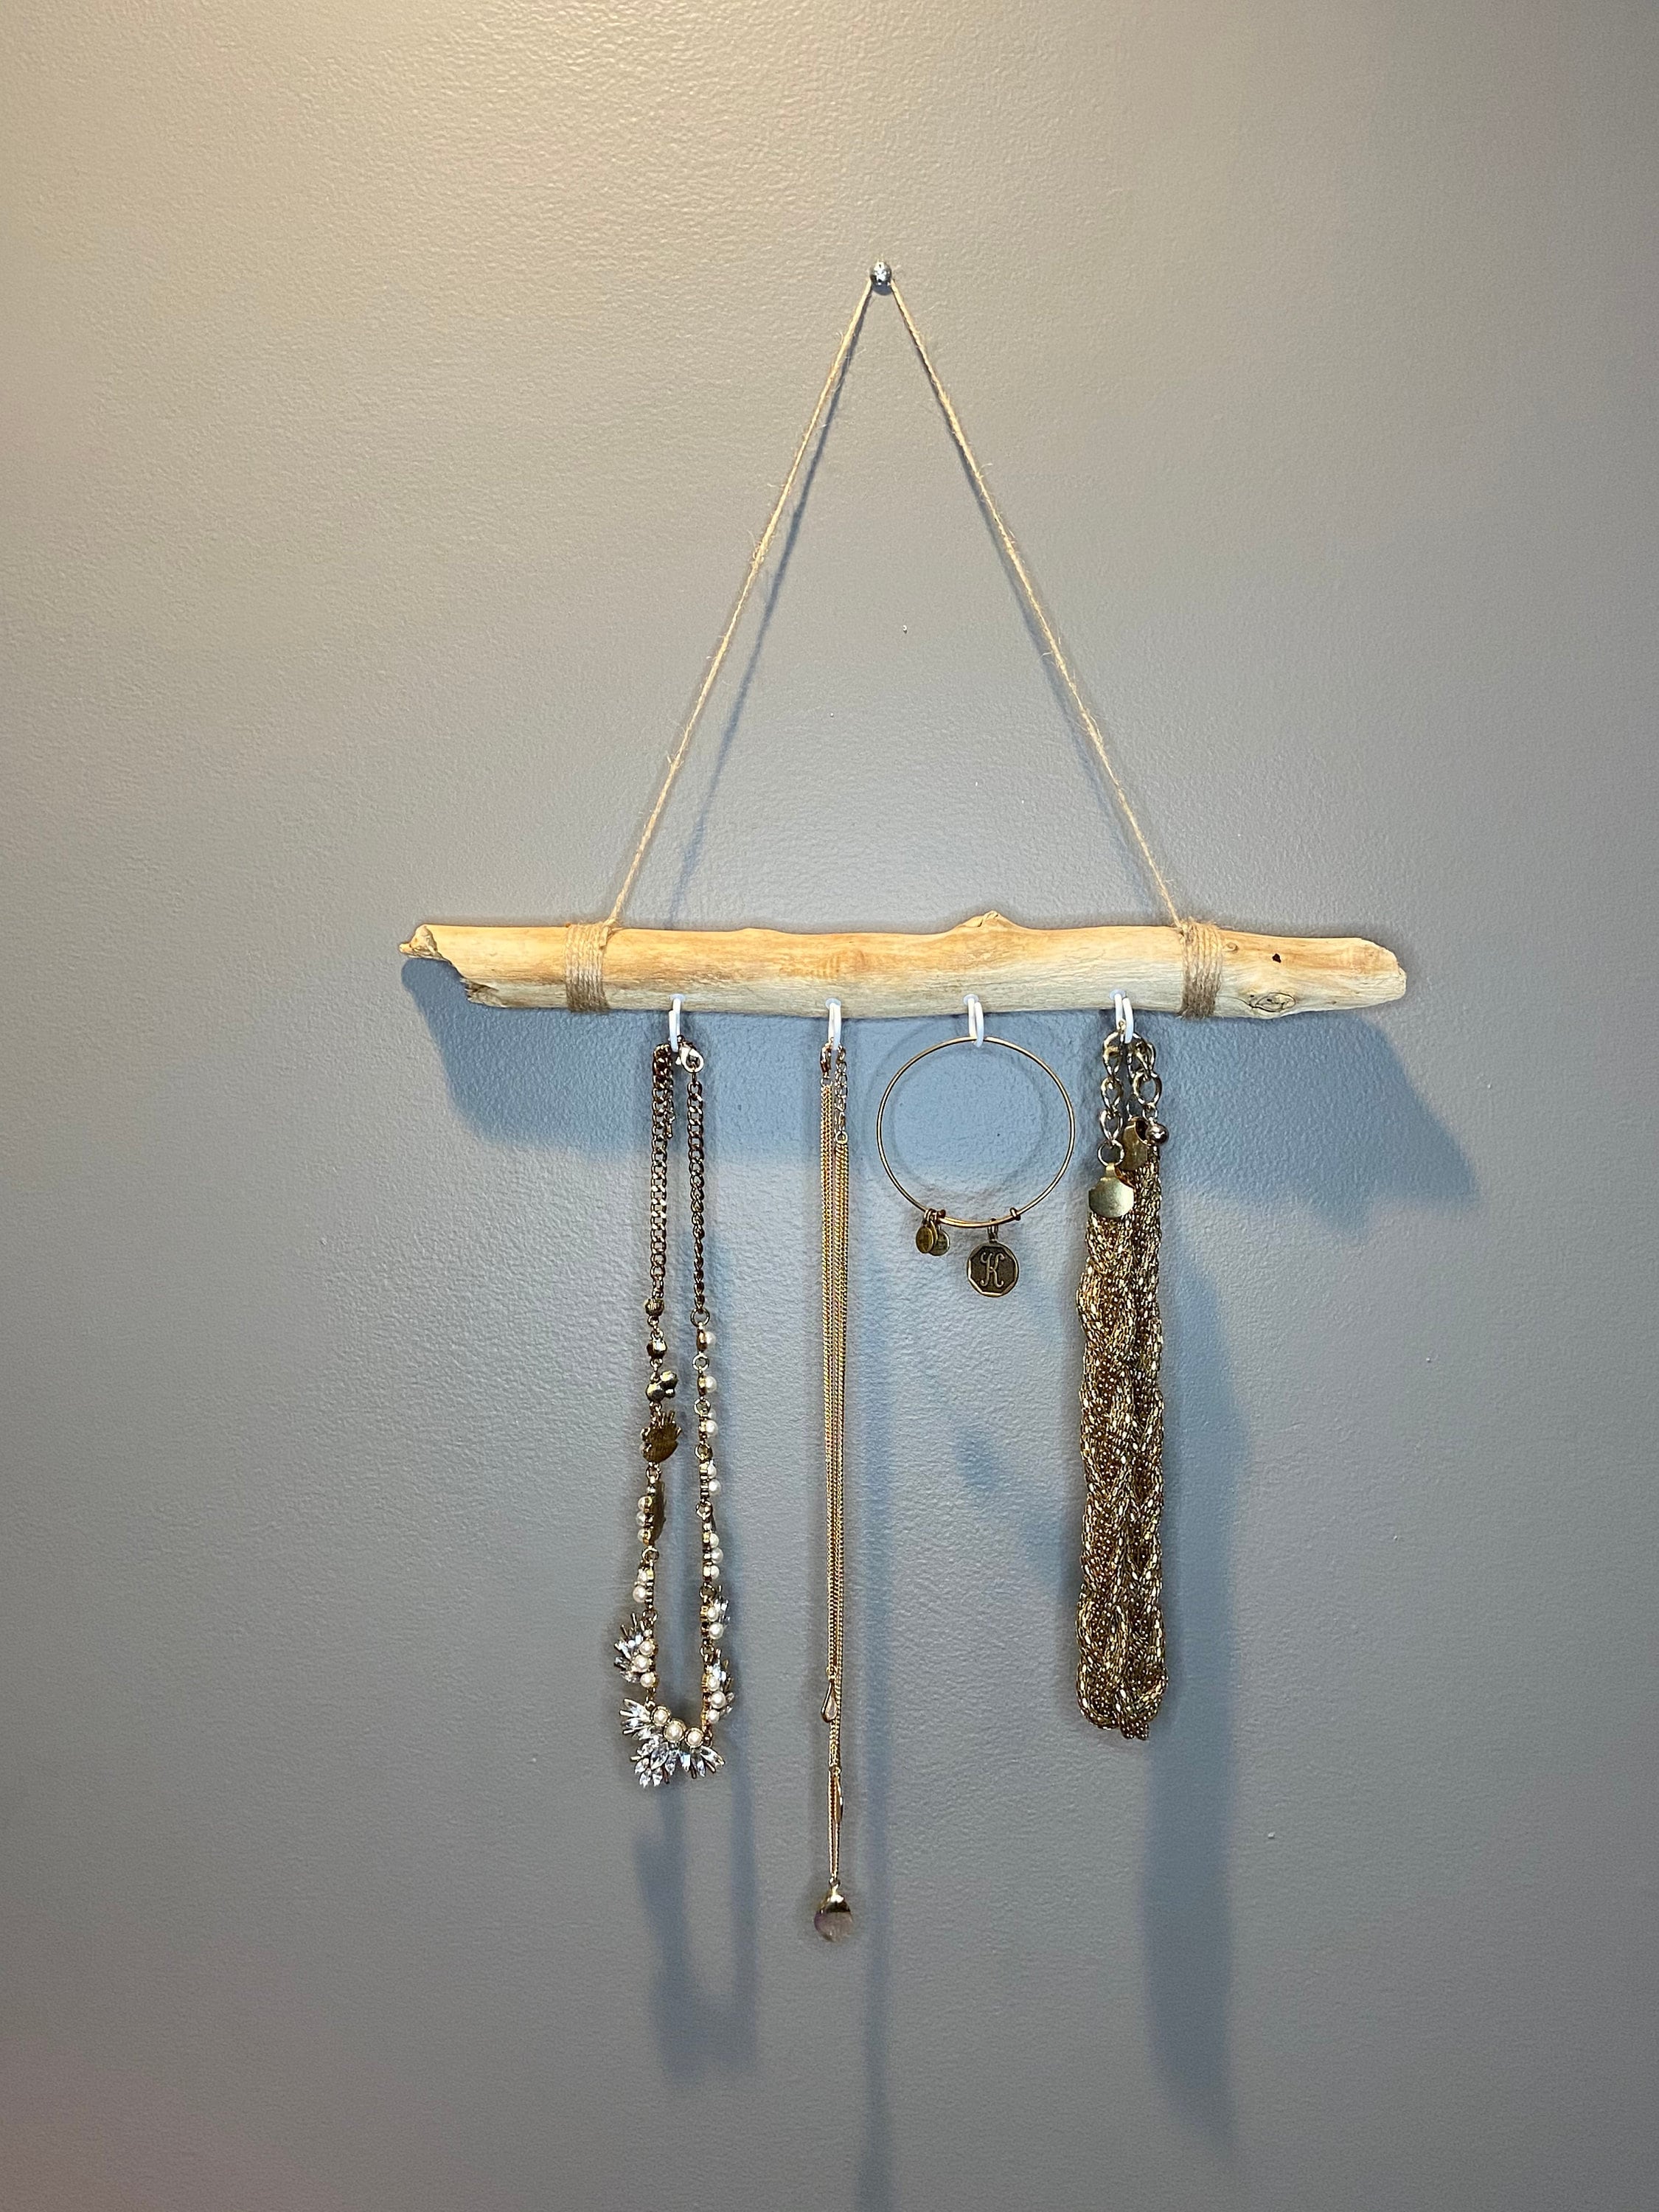 DIY Necklace Hanger from Driftwood or a Giant Cane Root - Cucicucicoo